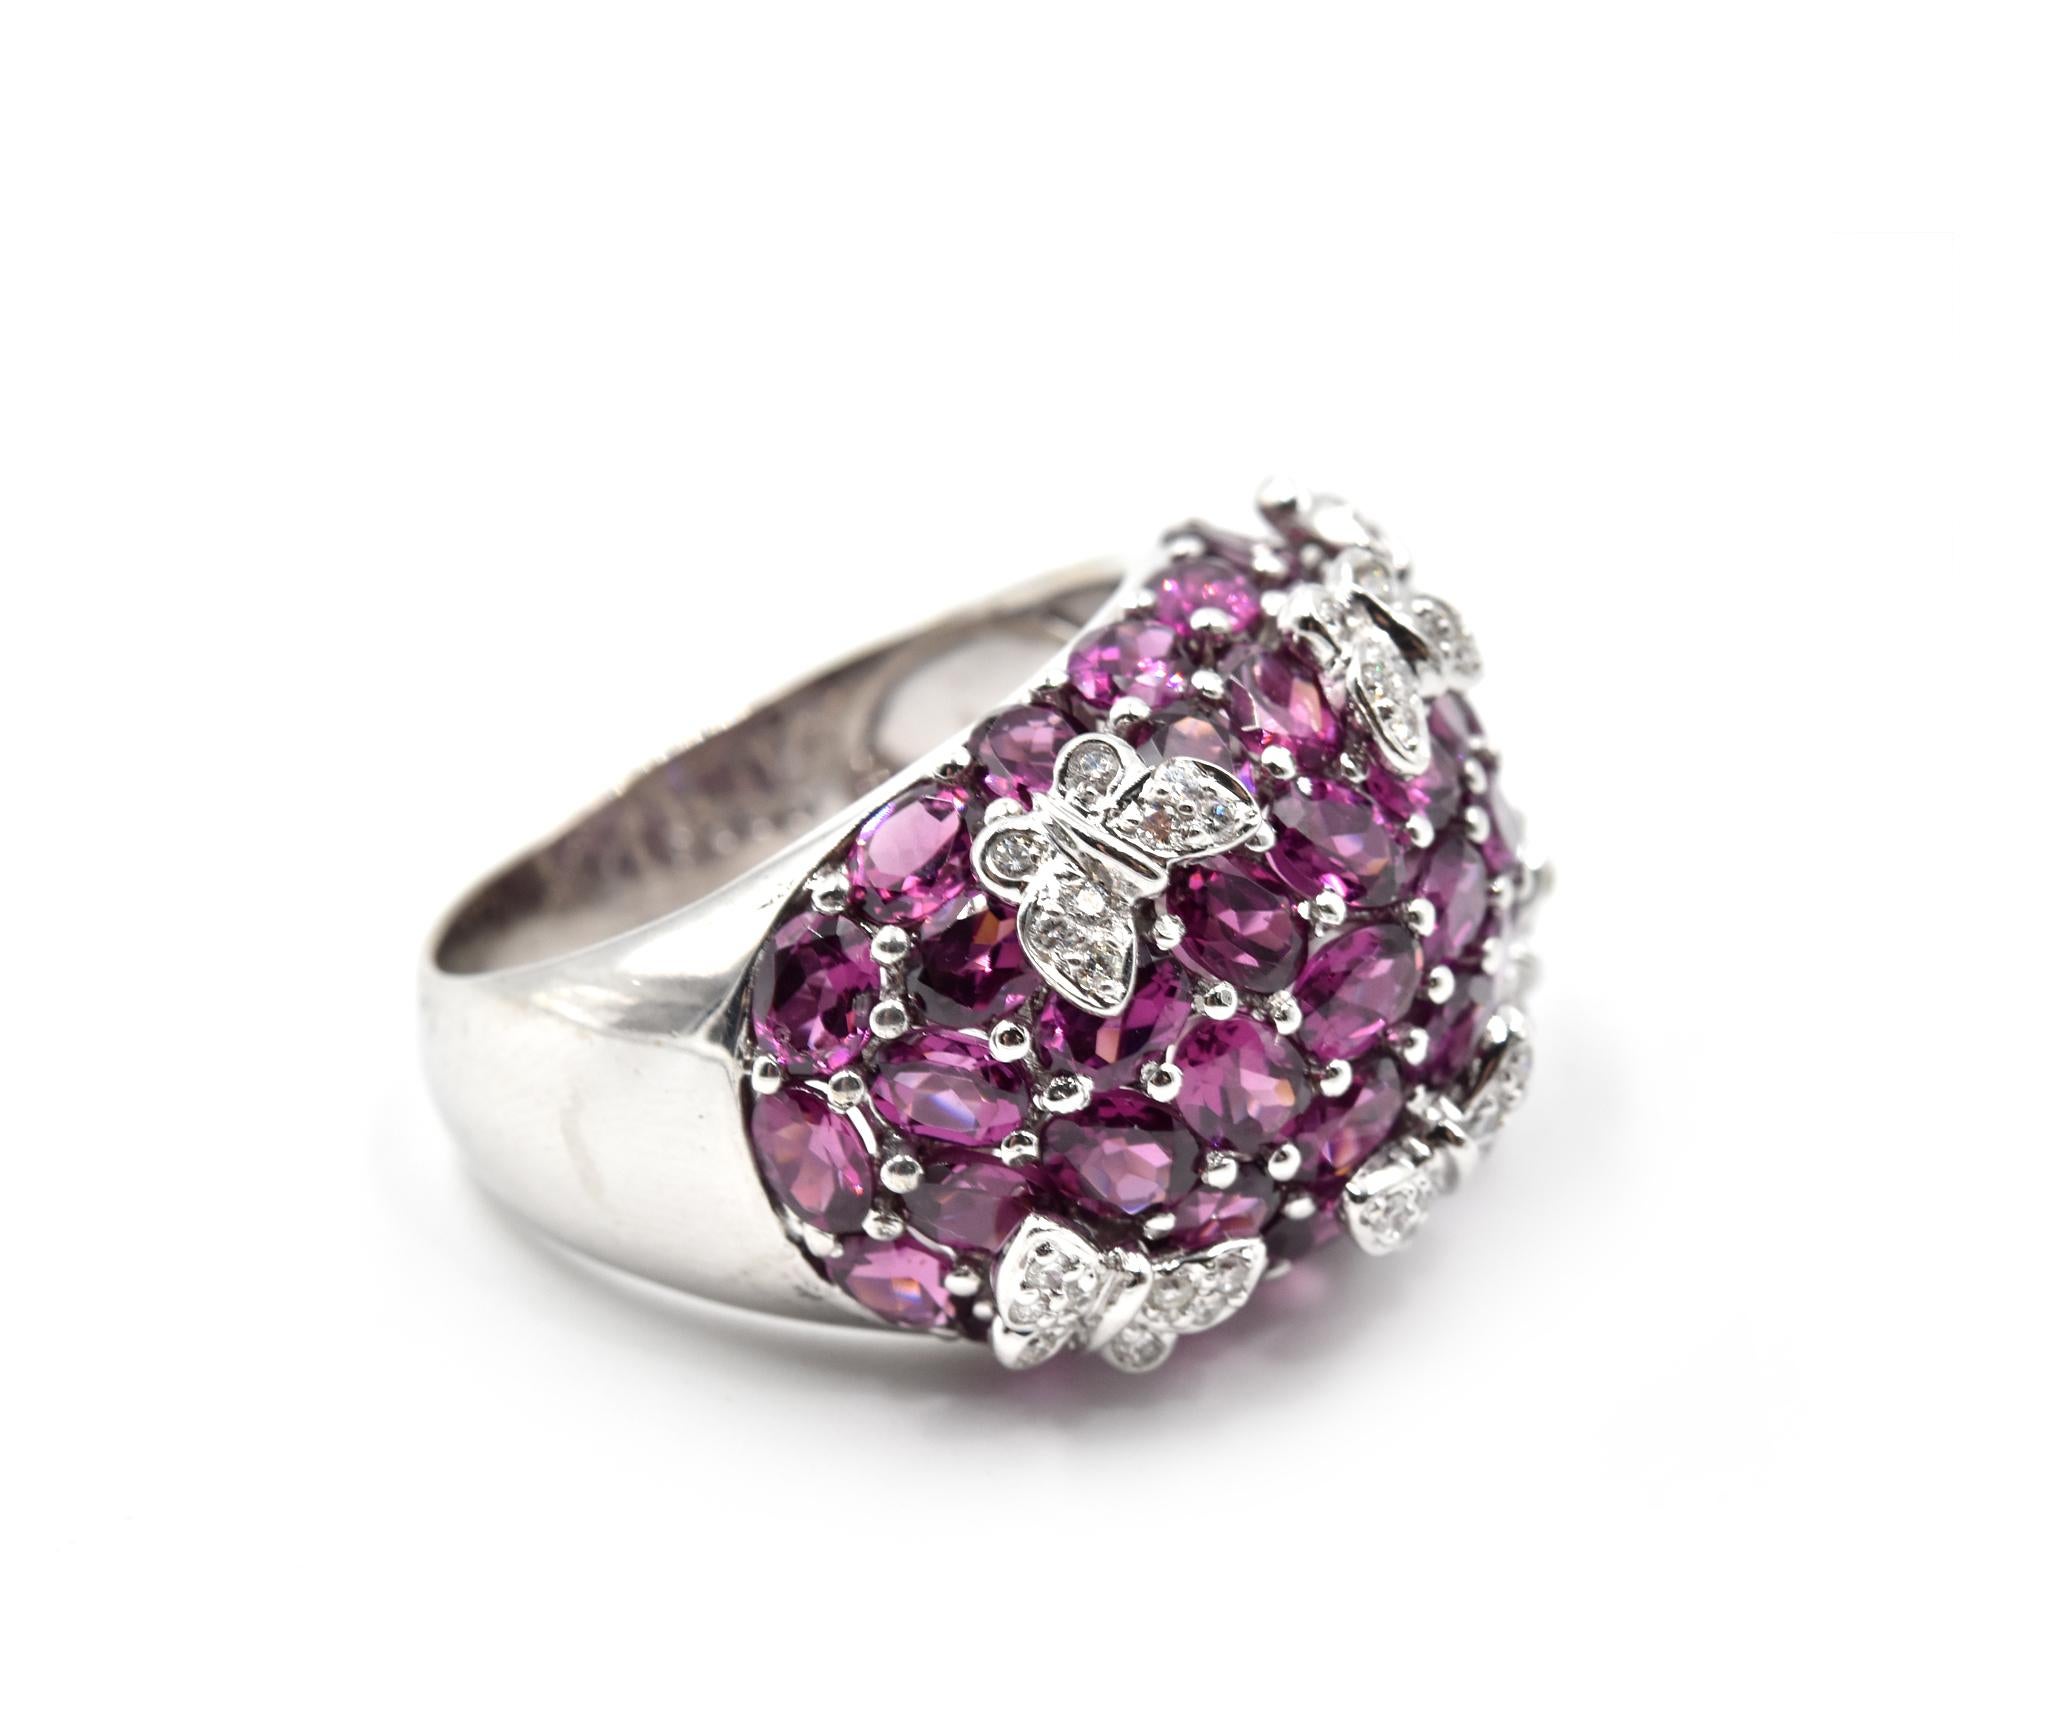 Designer: custom design
Material: 14k white gold 
Pink Tourmaline: 45 round cut = 7.50 carat weight
Diamonds: 36 round cut = 0.30 carat weight
Ring Size: 10 (please allow two additional shipping days for sizing requests) 
Weight: 13.00 grams

